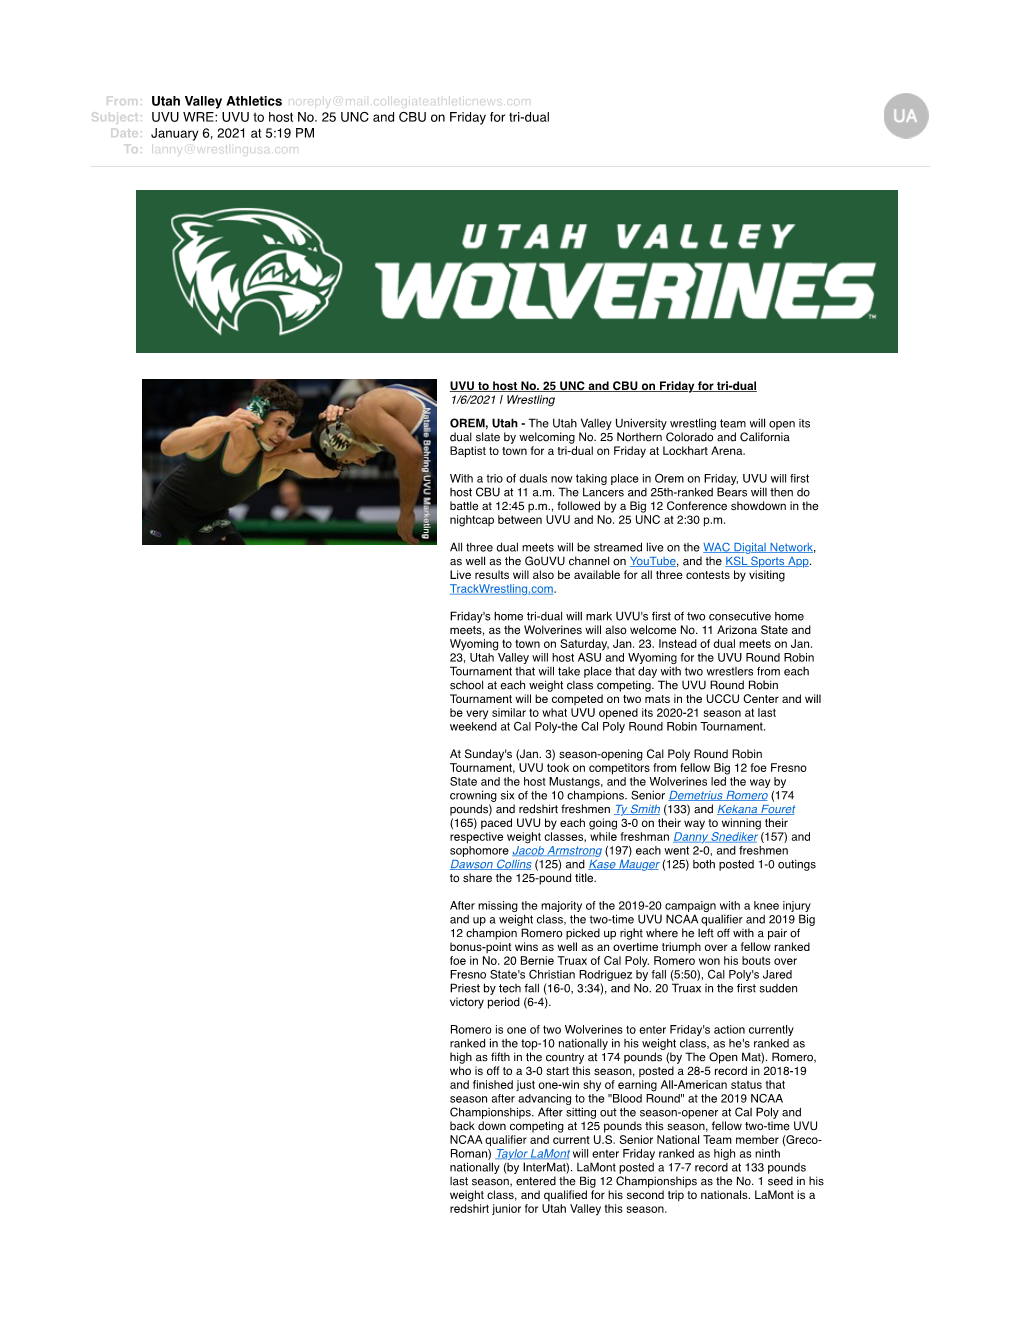 UVU WRE UVU to Host No 25 UNC and CBU on Friday for Tridual